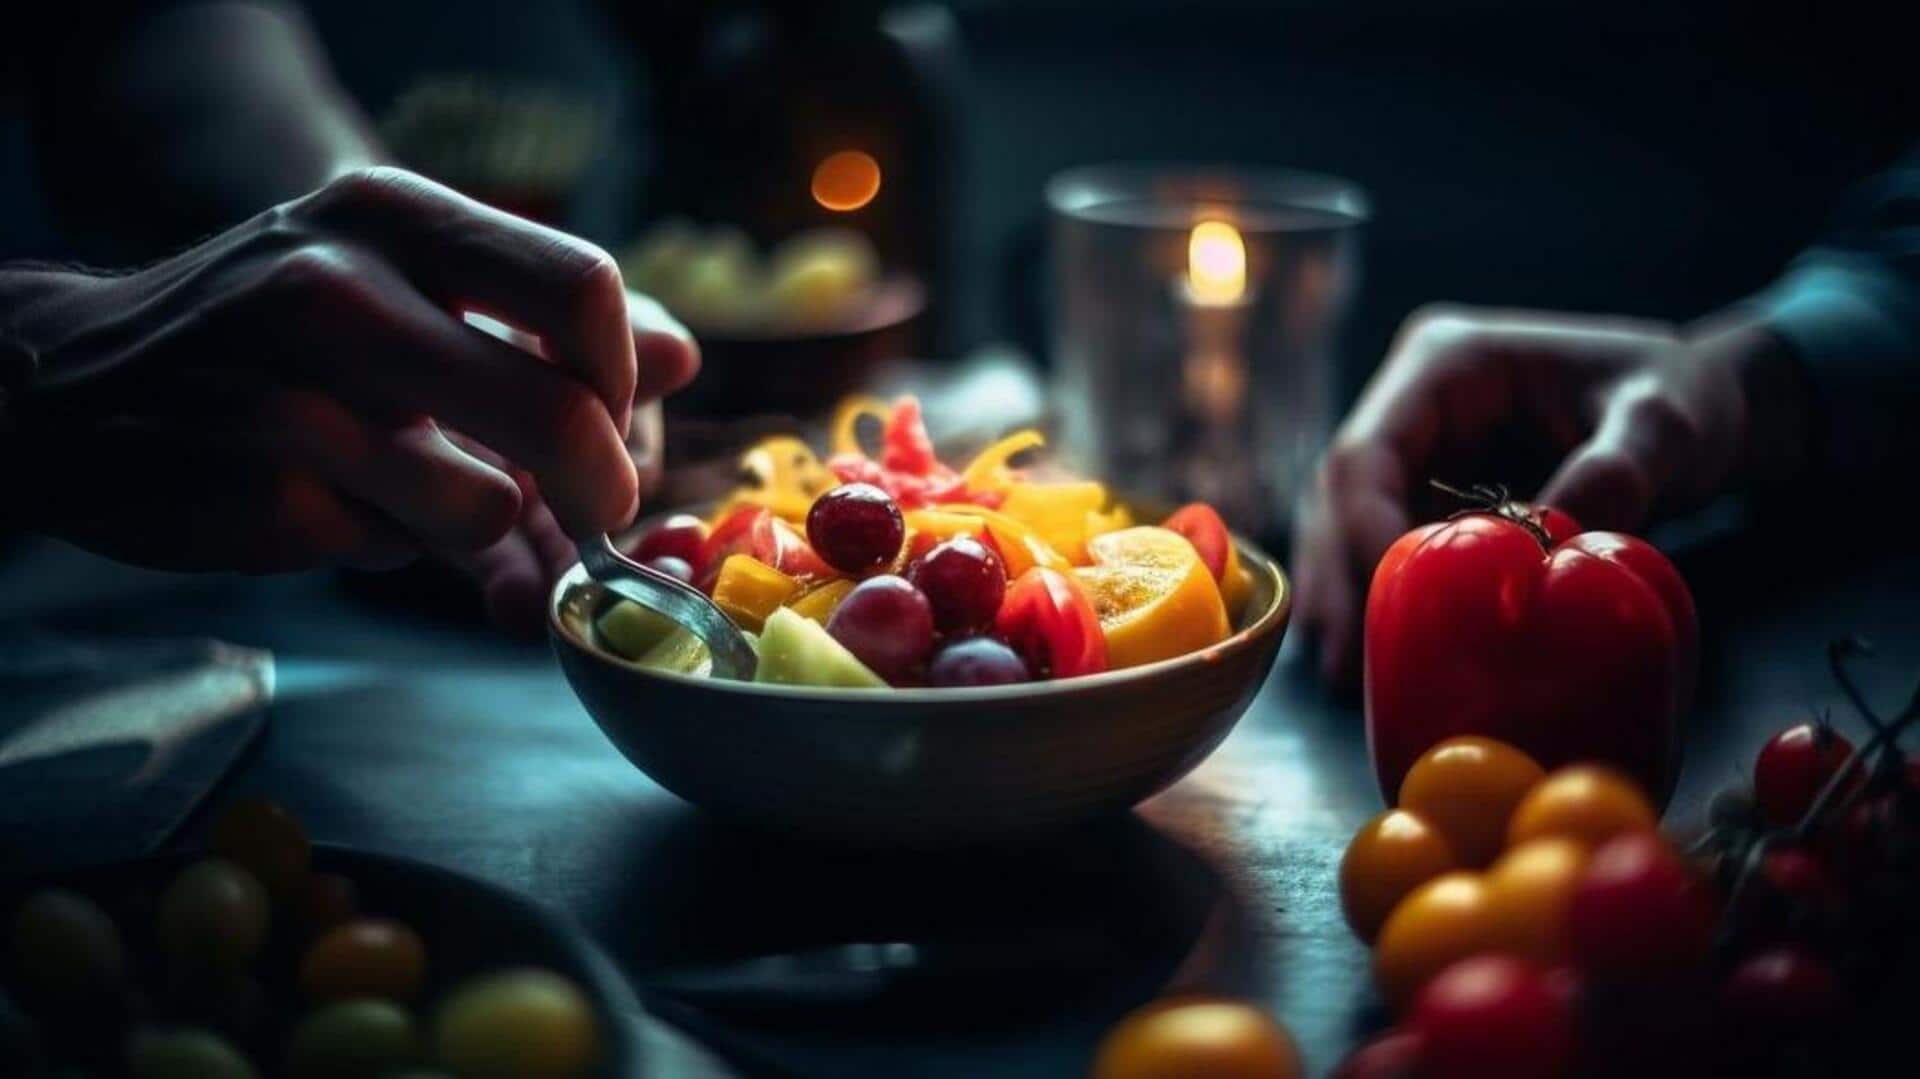 Don't eat these fruits at night. Here's why